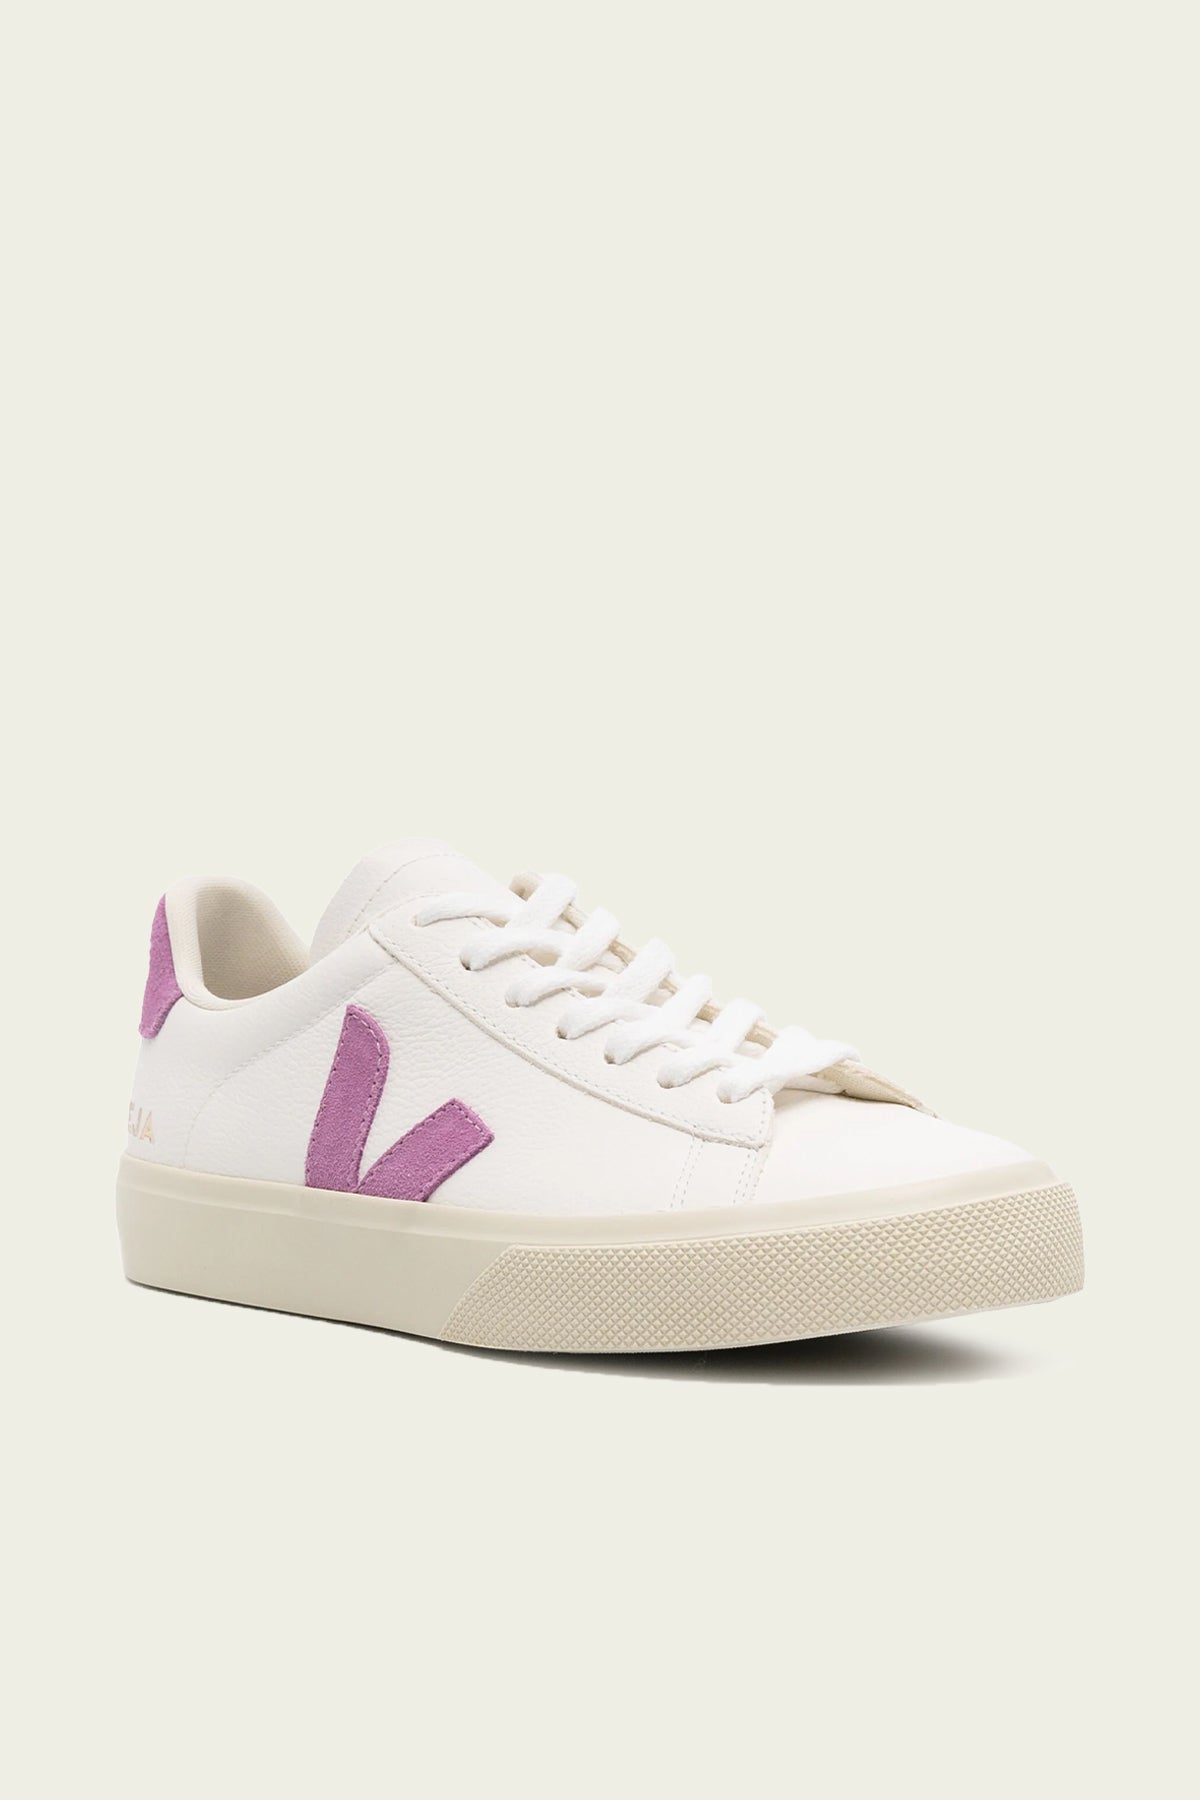 Campo Chromefree Leather Sneaker in White Mulberry - shop-olivia.com